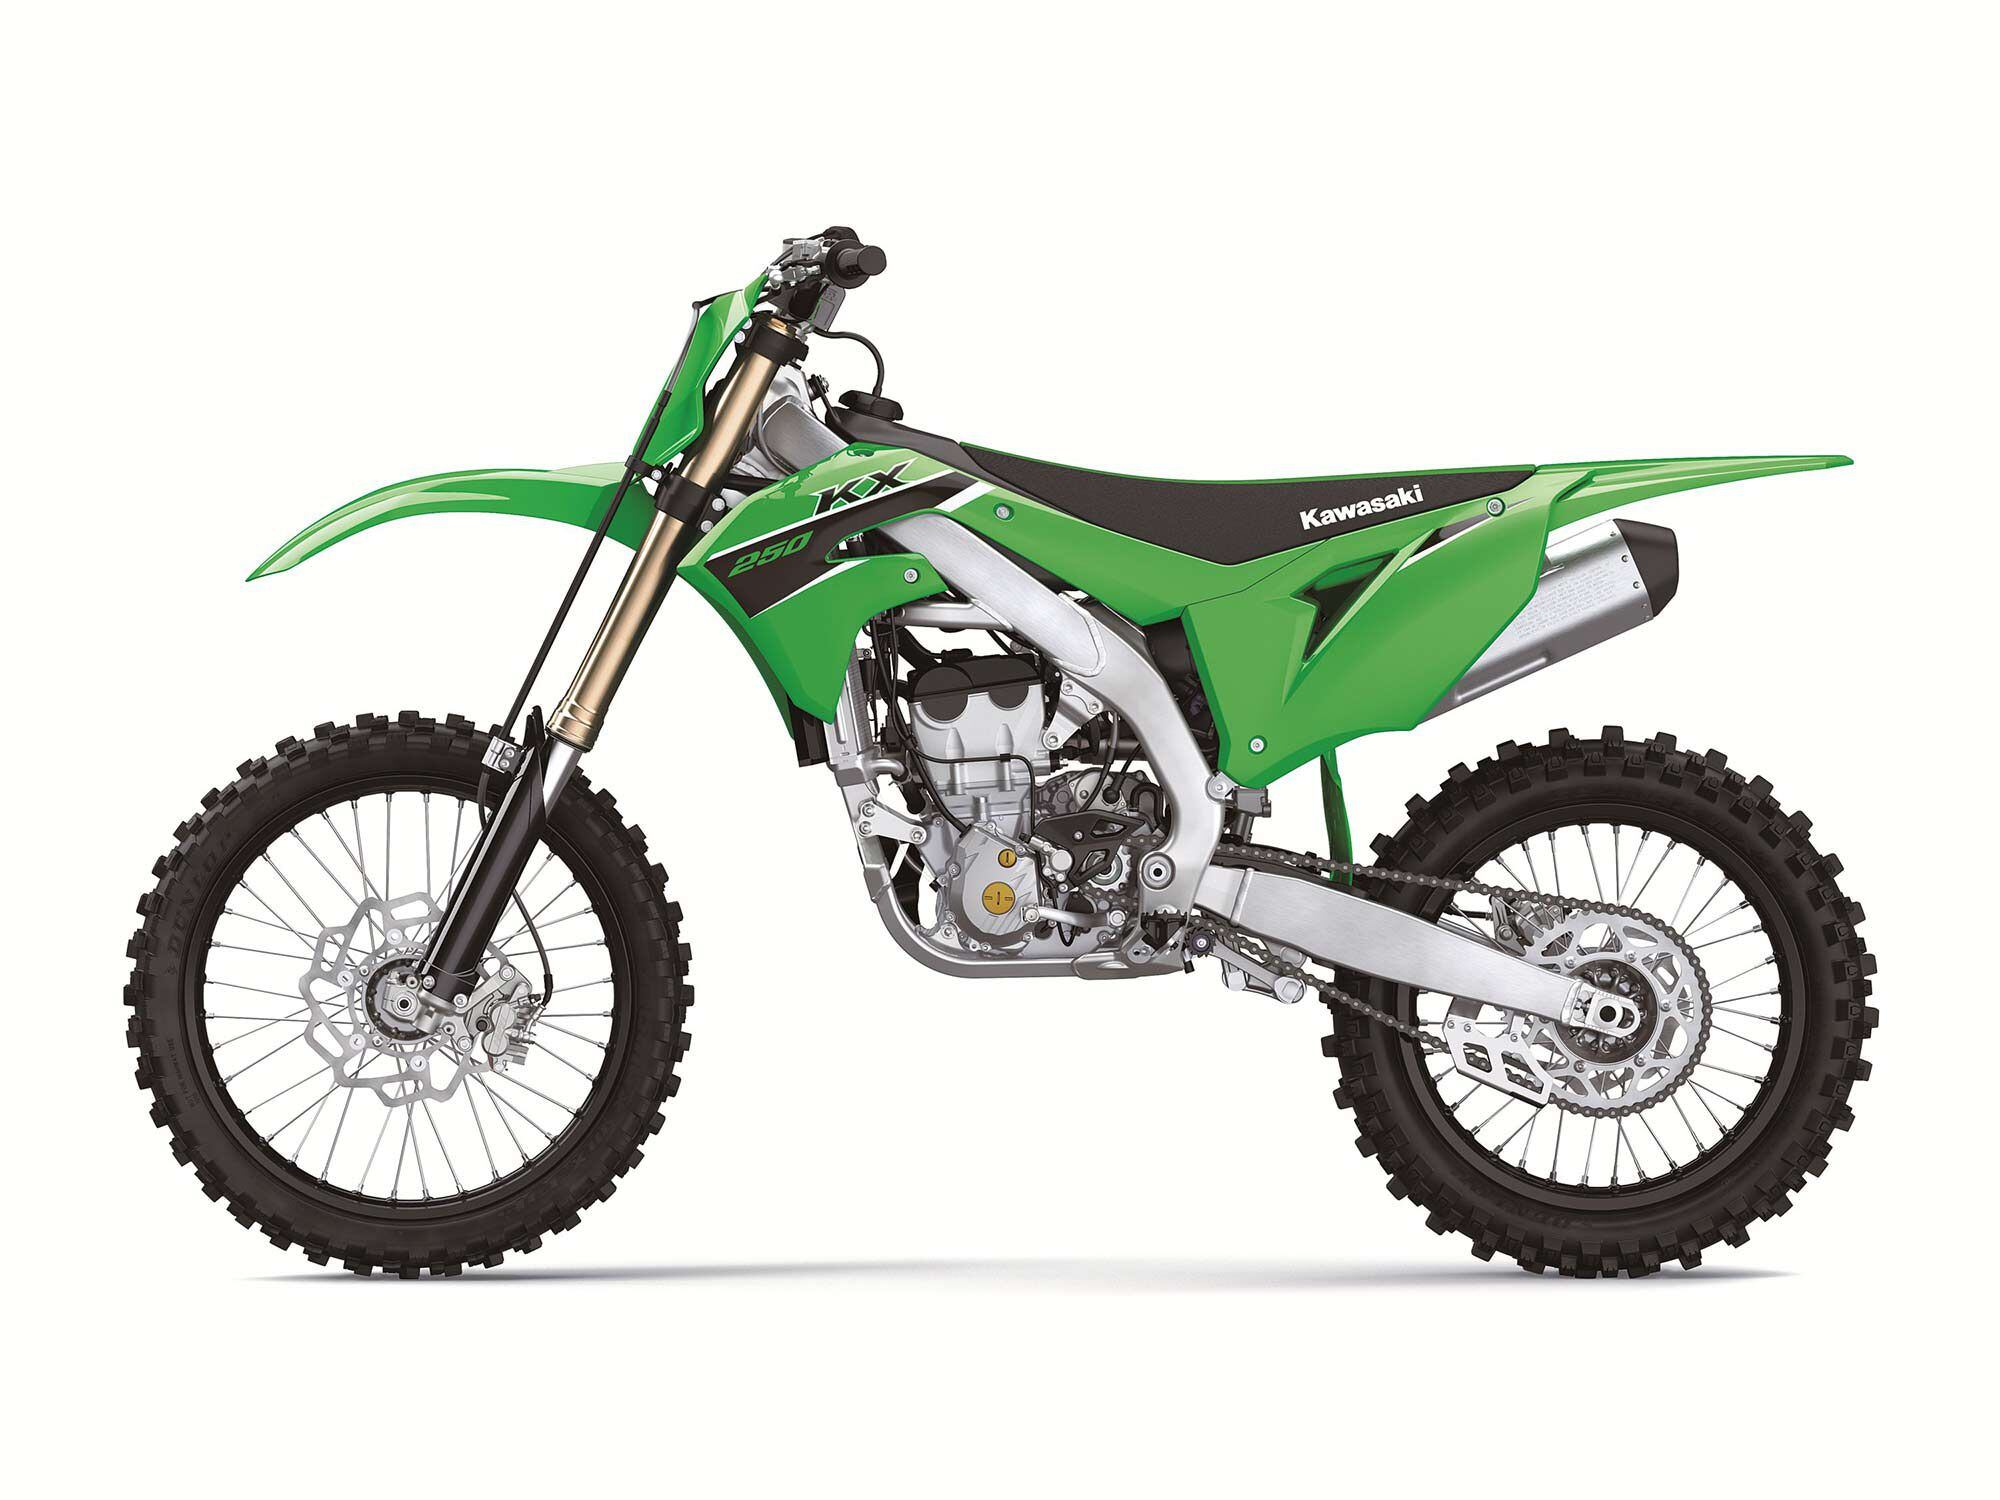 The 2023 Kawasaki KX250 gets an engine overhaul for more efficient performance.